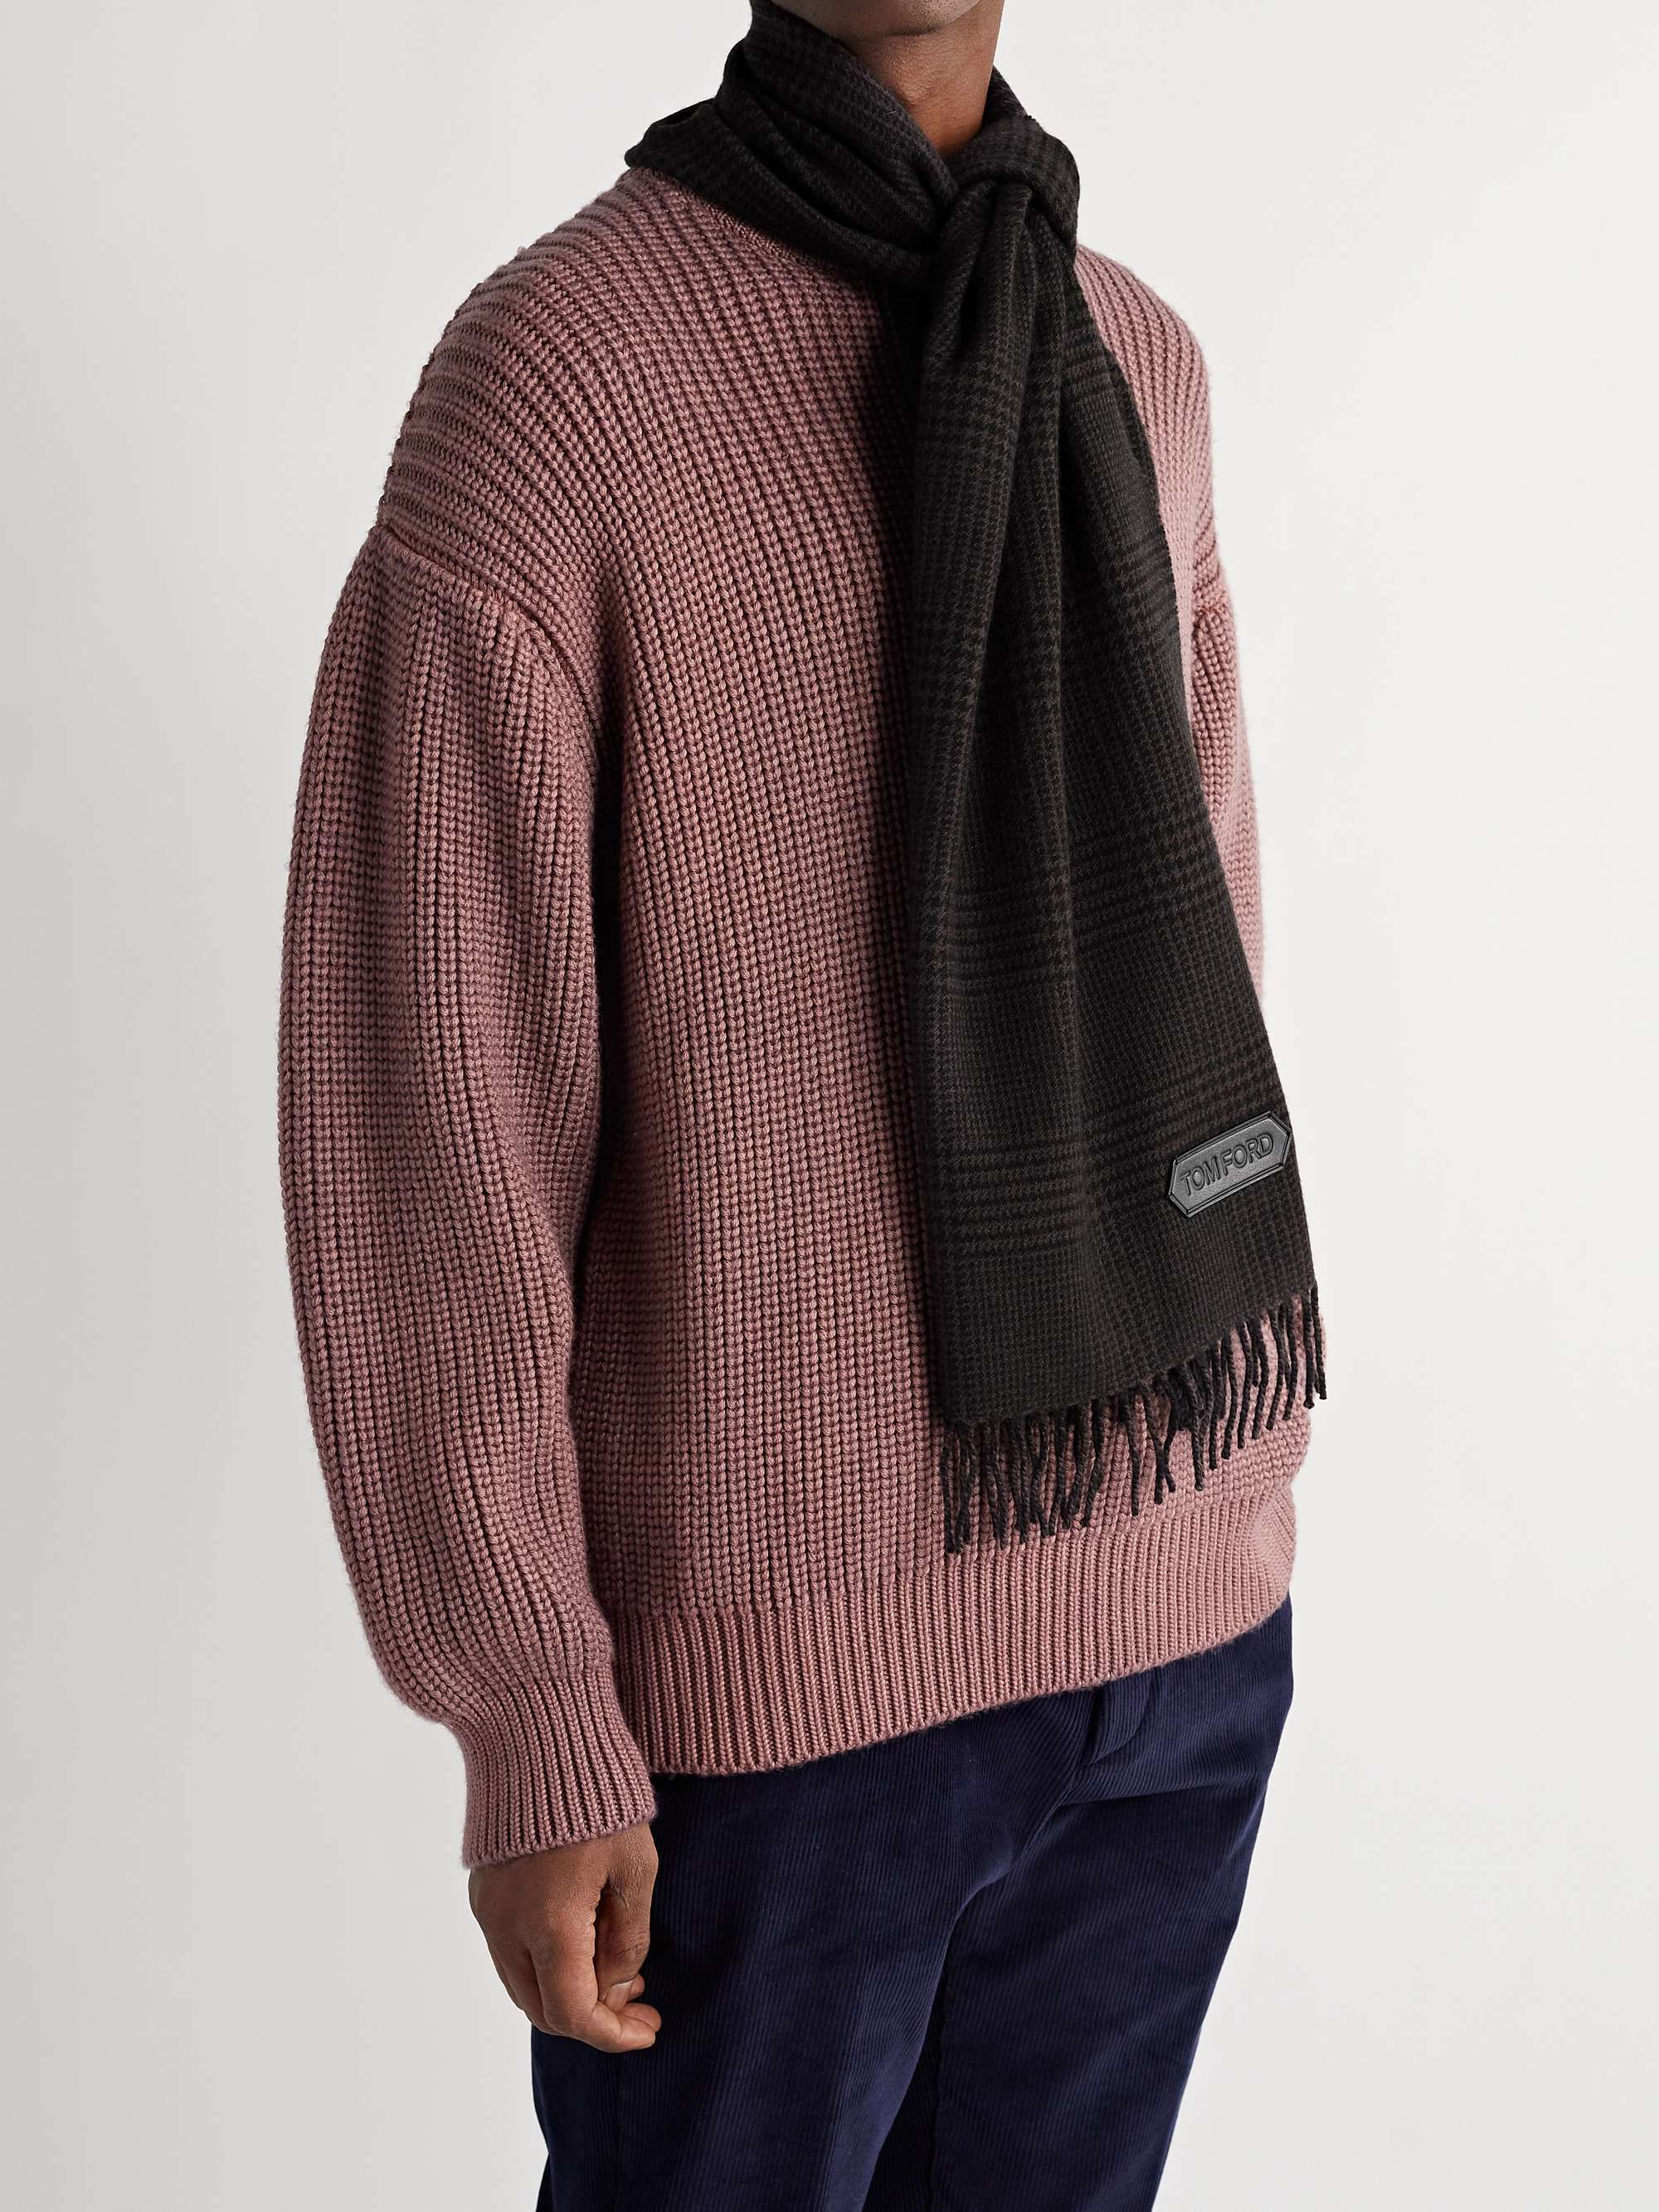 TOM FORD Logo-Appliquéd Fringed Prince of Wales Checked Cashmere and Wool-Blend Scarf